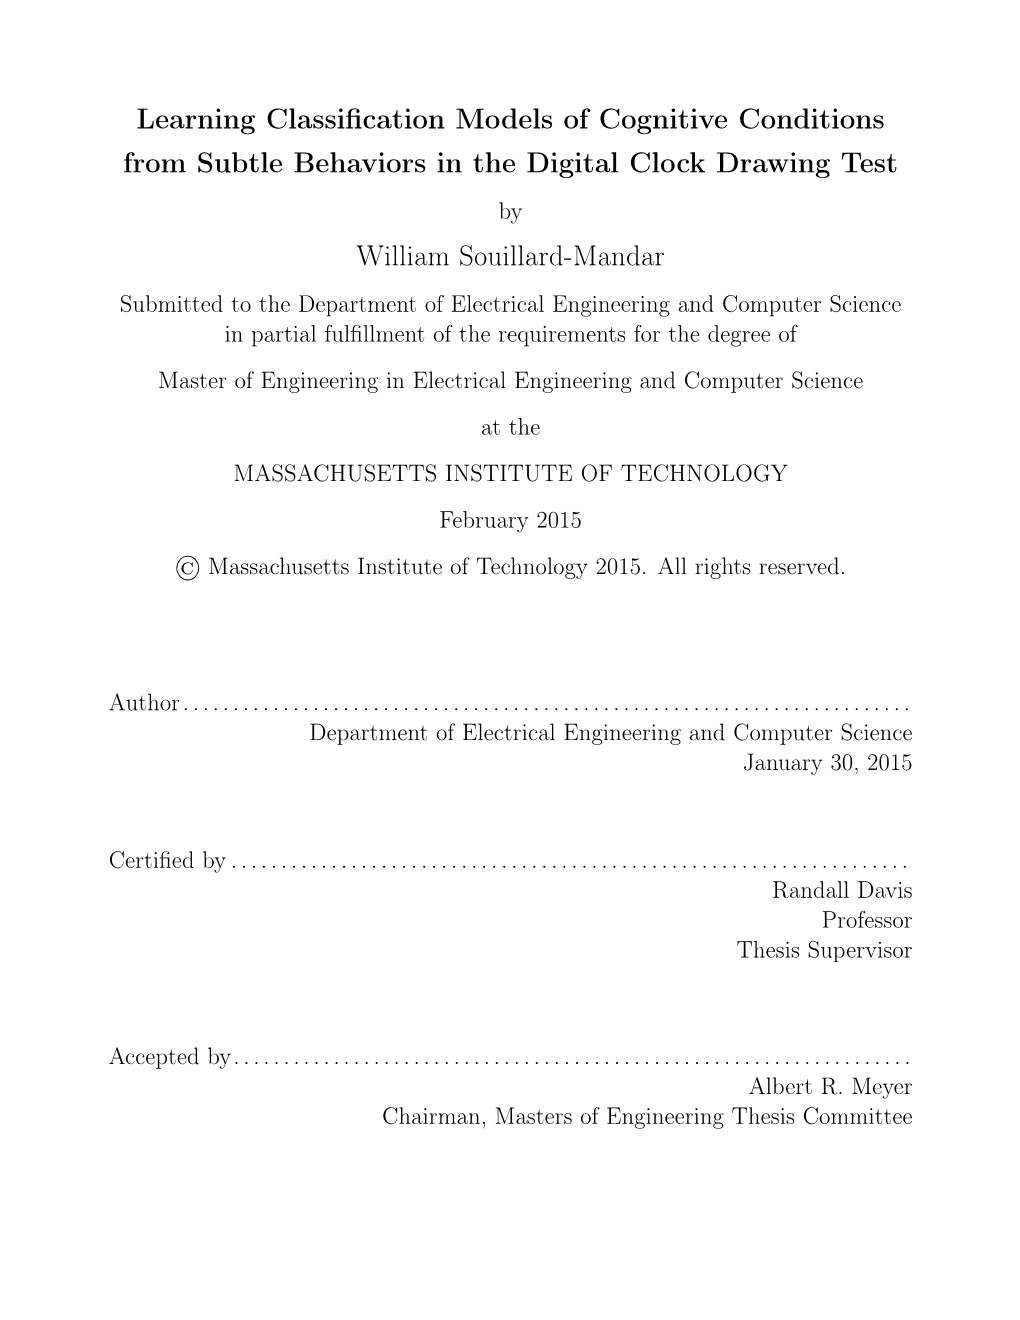 Learning Classification Models of Cognitive Conditions from Subtle Behaviors in the Digital Clock Drawing Test